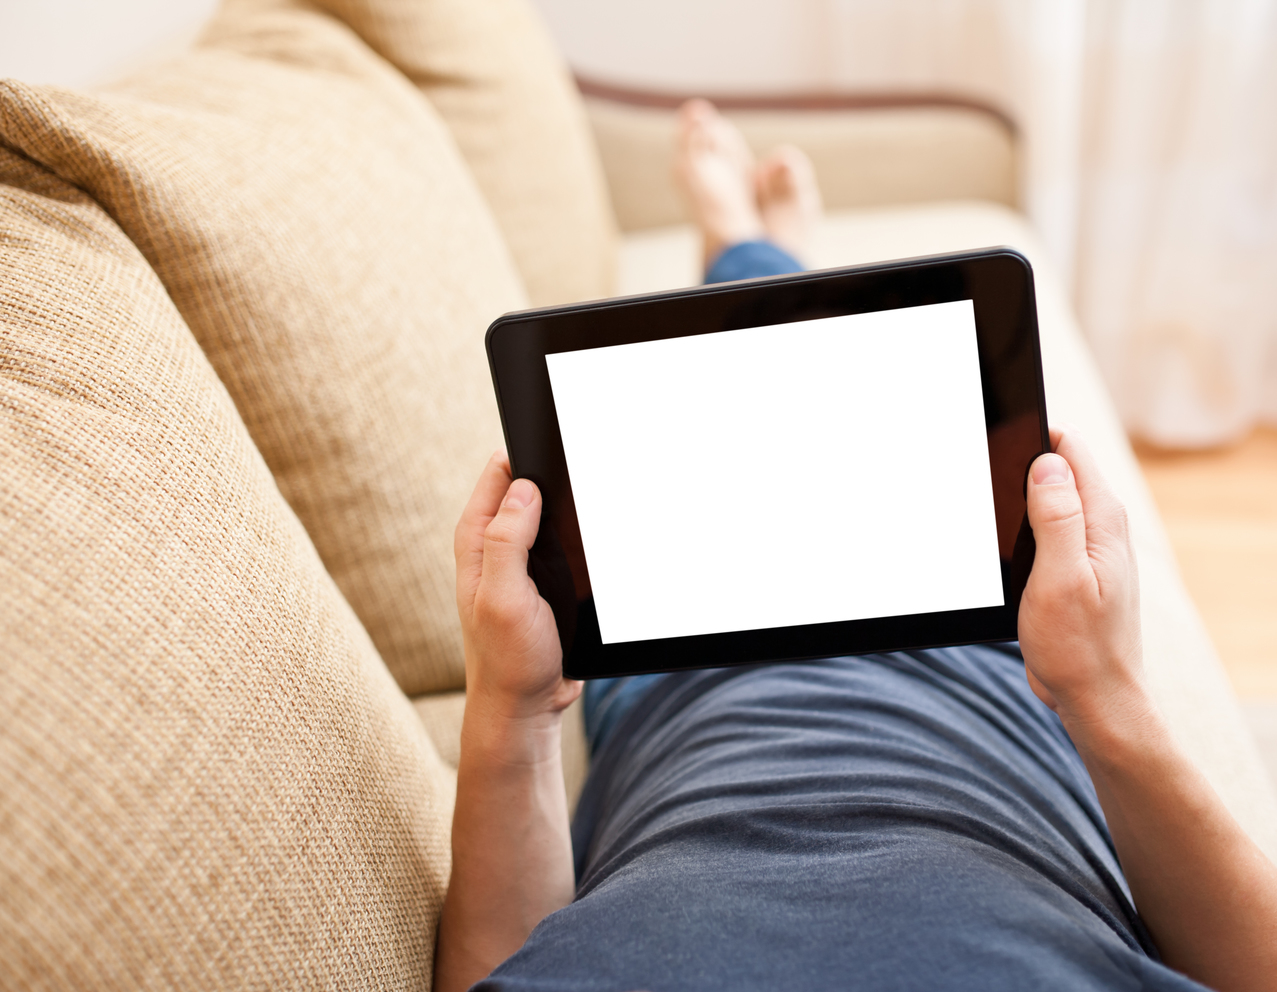 Man relaxing with tablet pc, laying on sofa